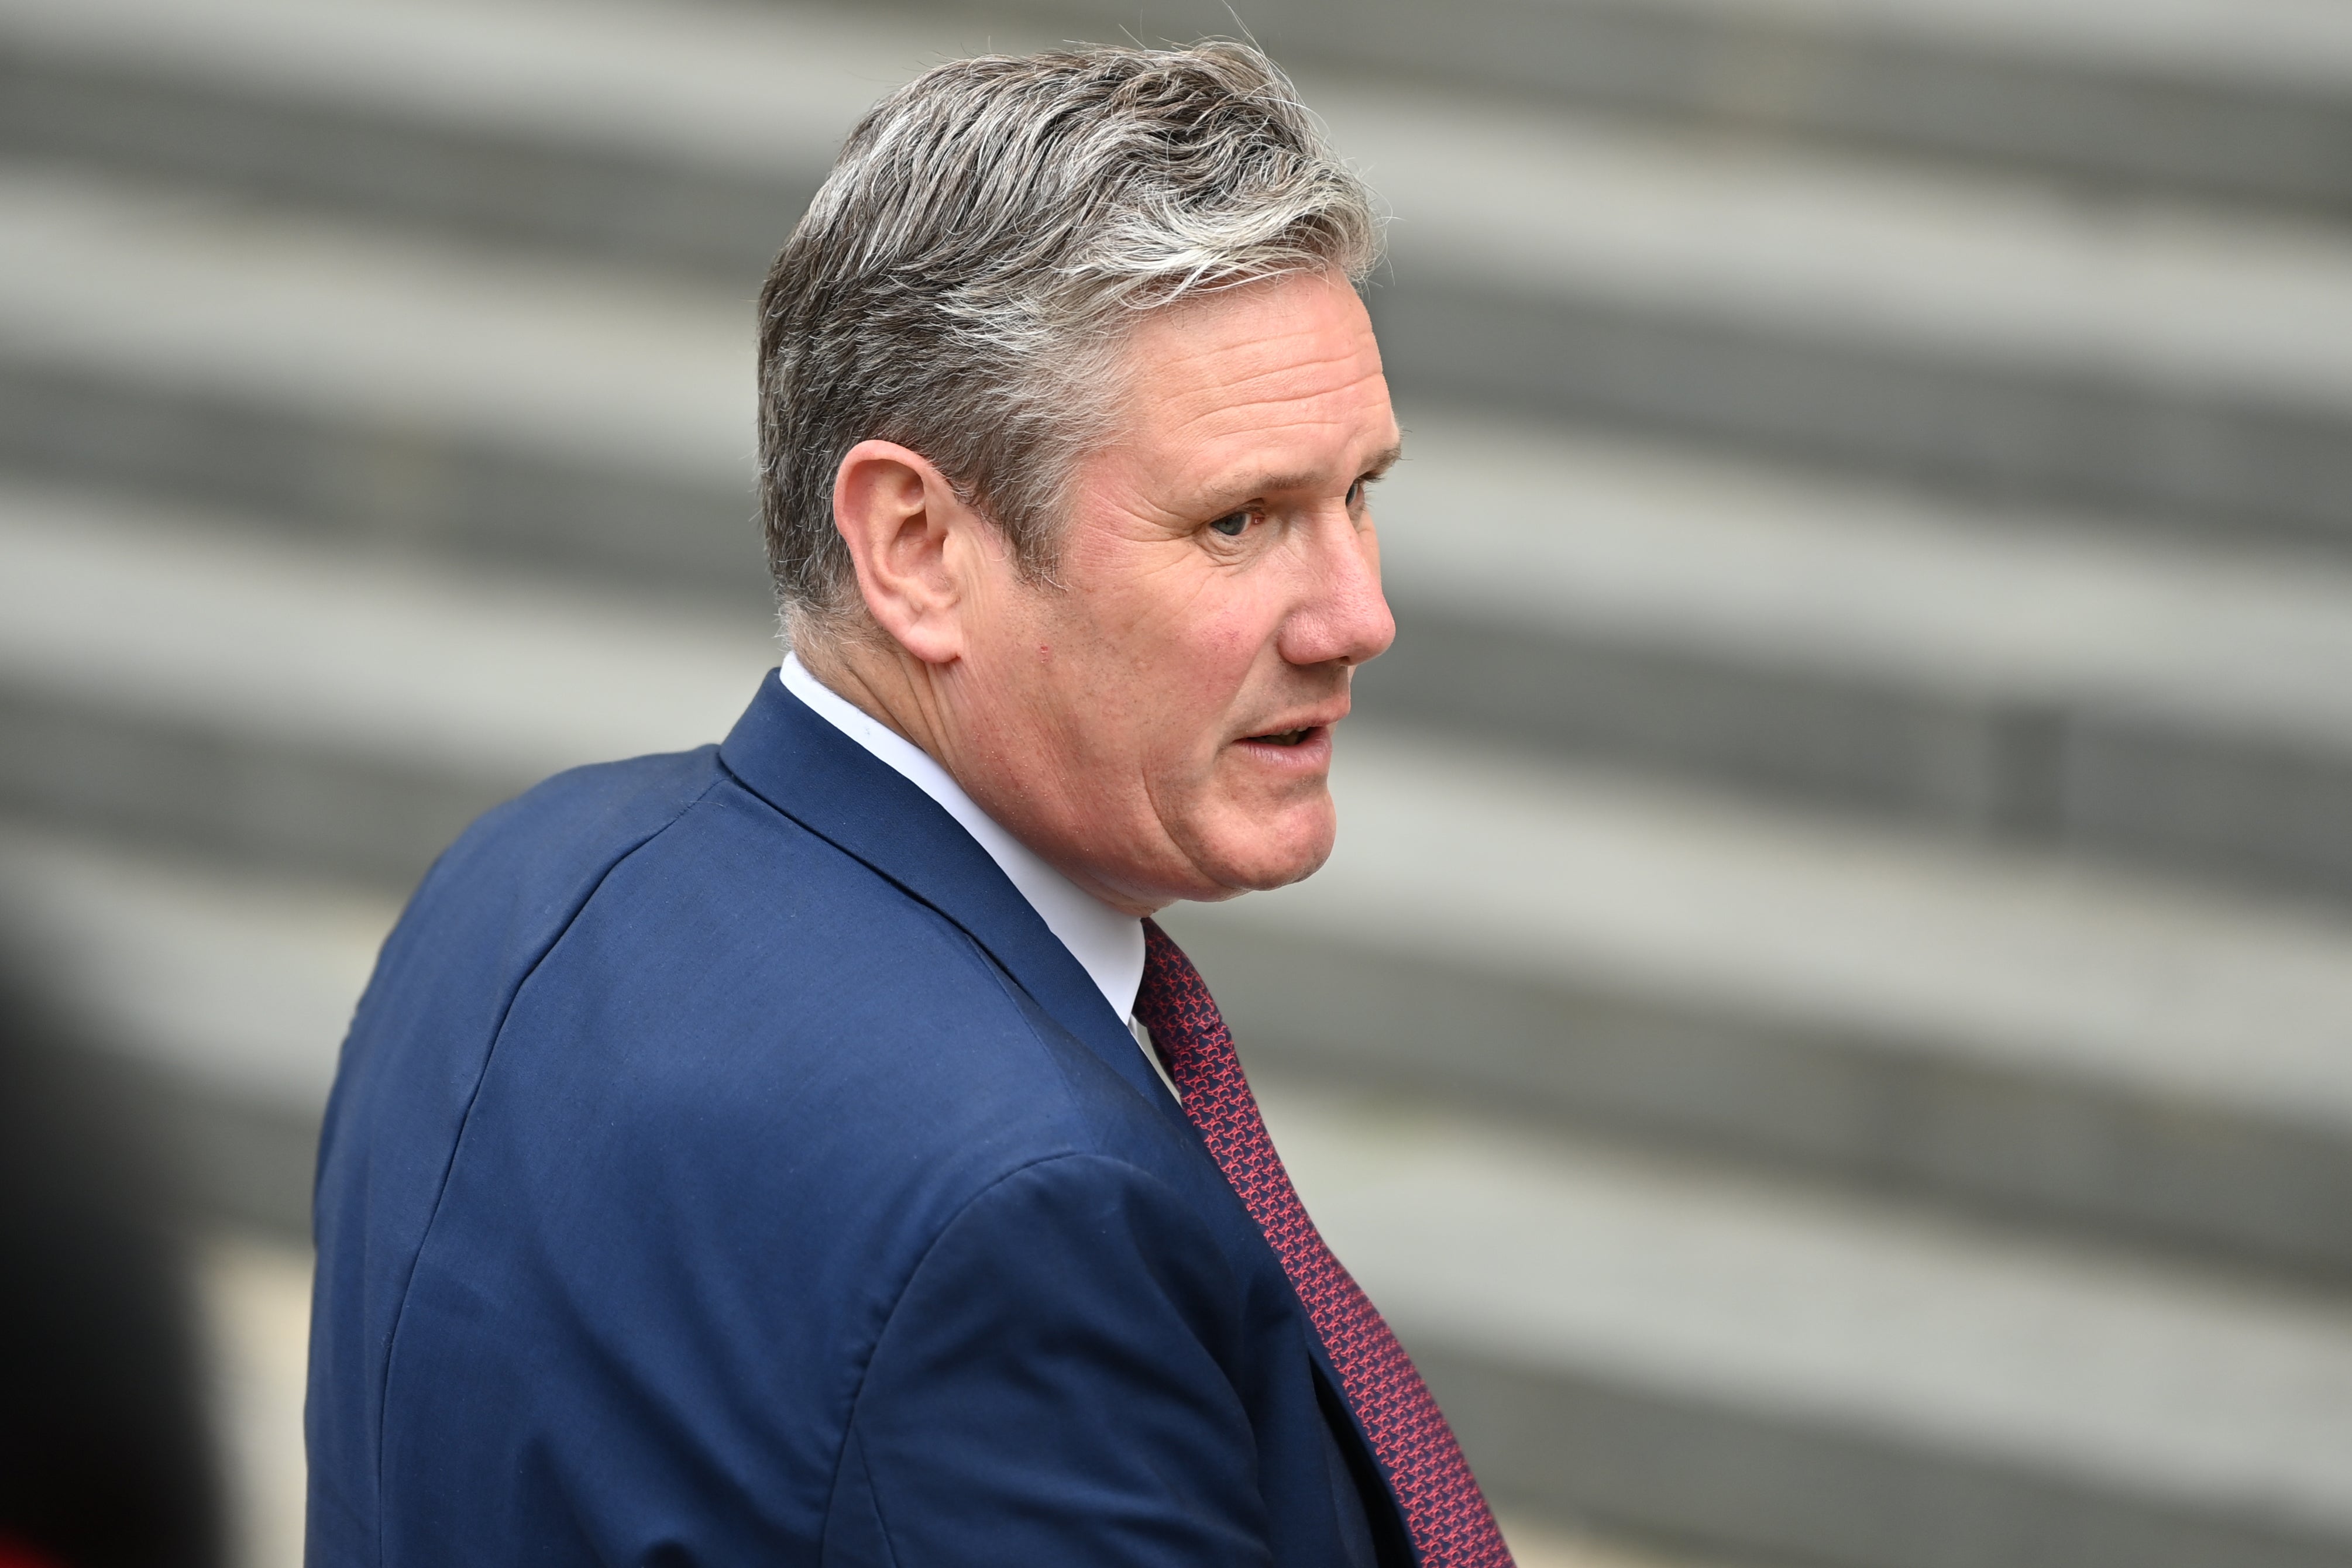 Sir Keir Starmer is under investigation by the parliamentary standards commissioner